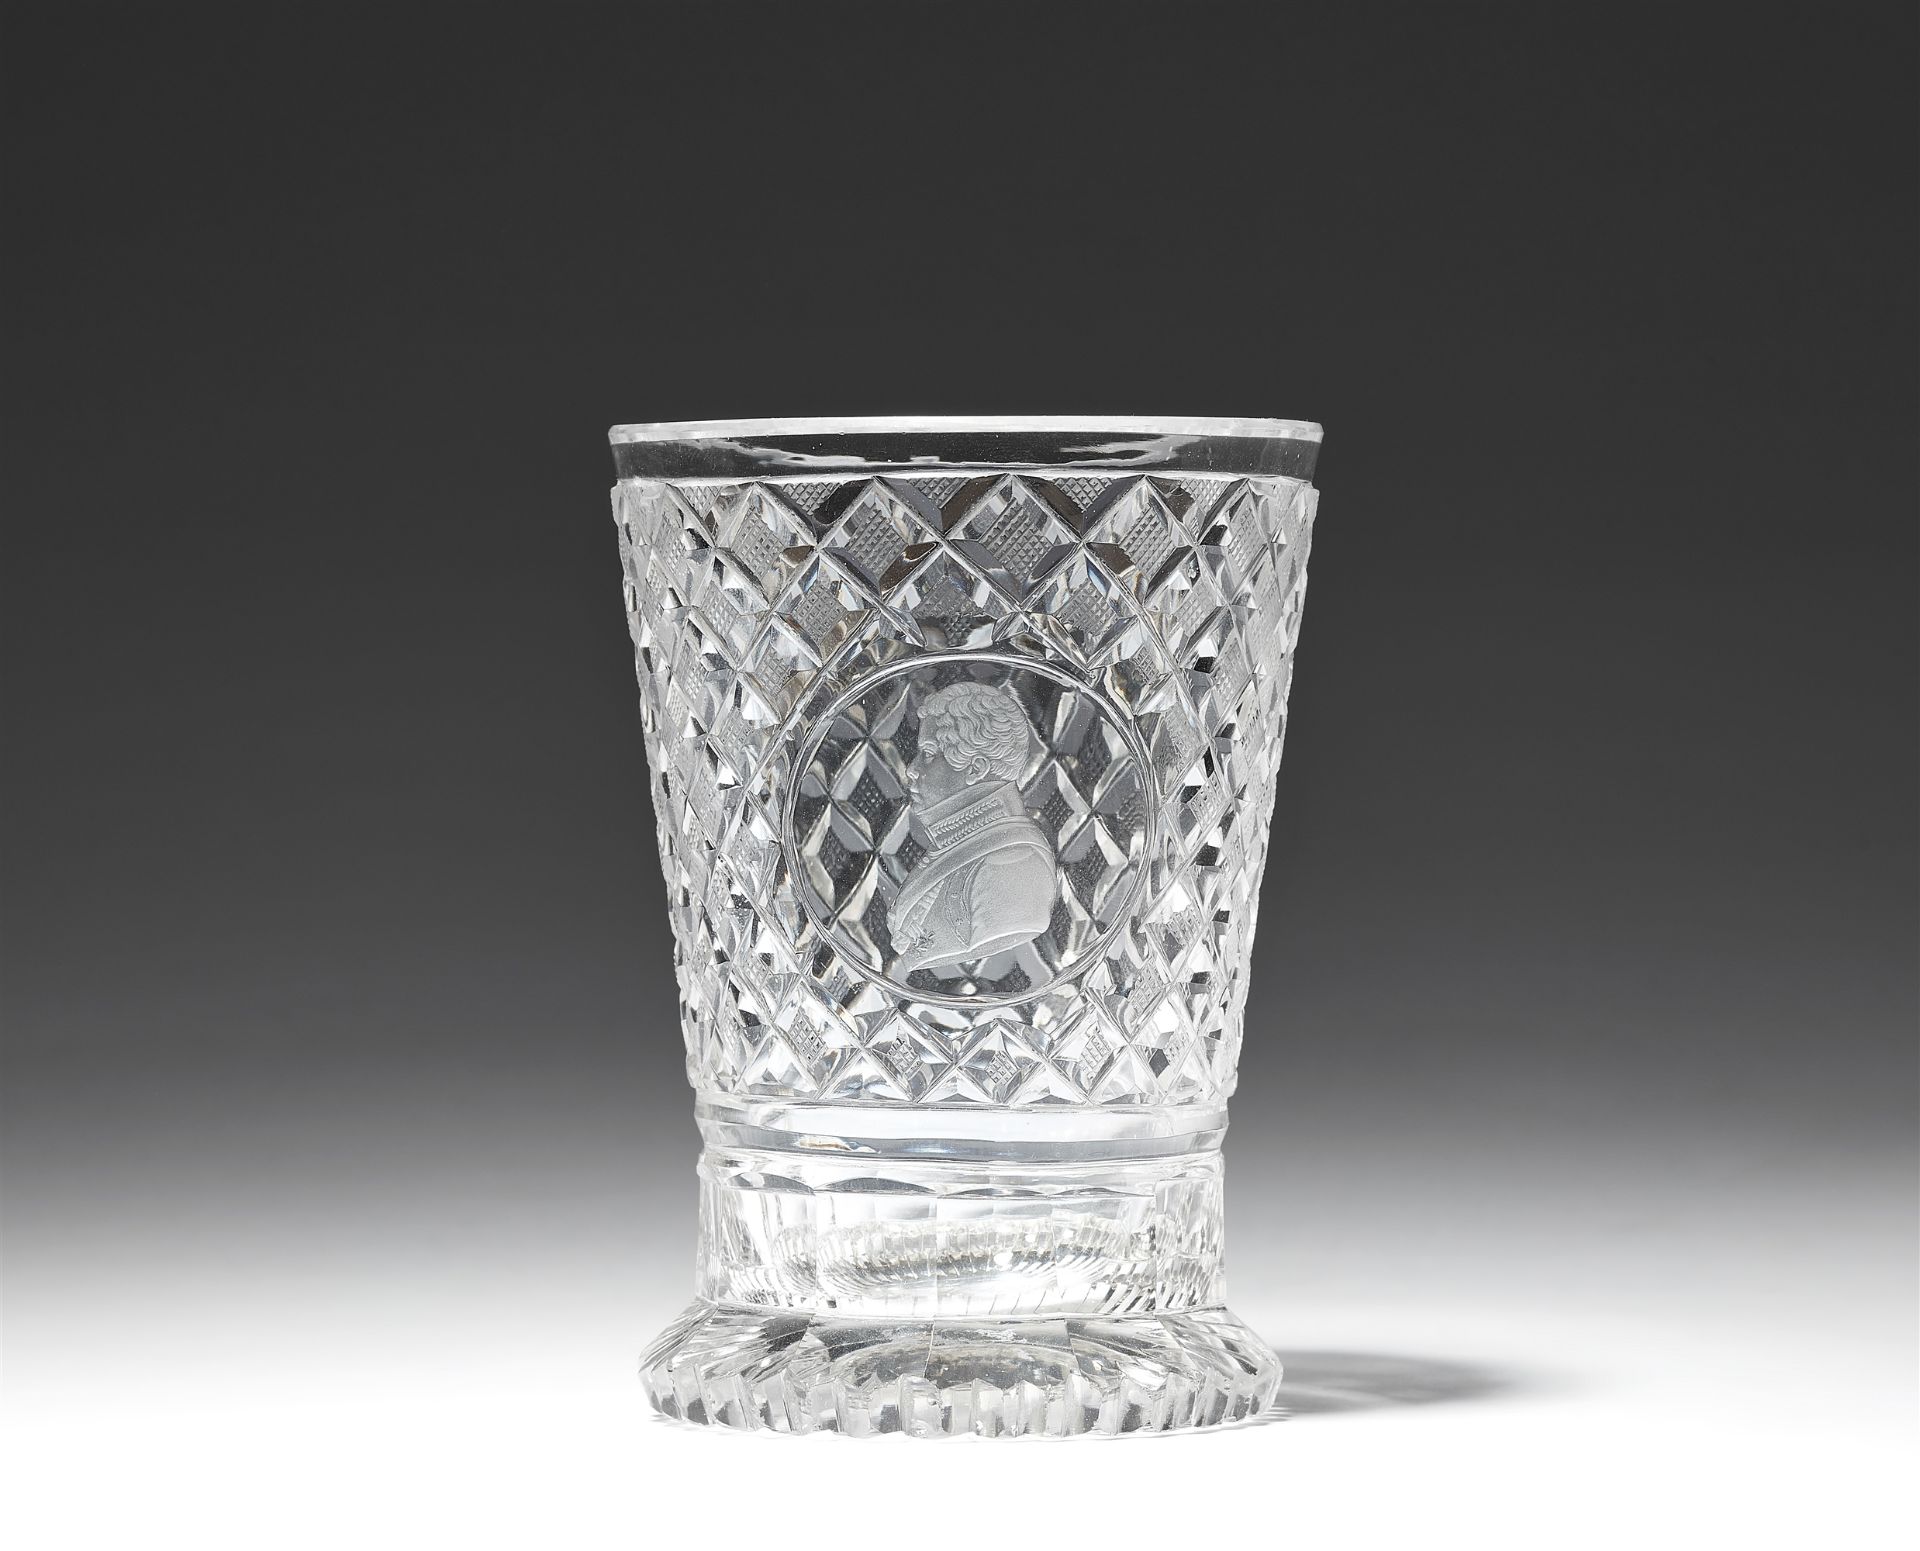 A cut glass beaker with a portrait of Prince Frederick Wilhelm Ludwig of Prussia